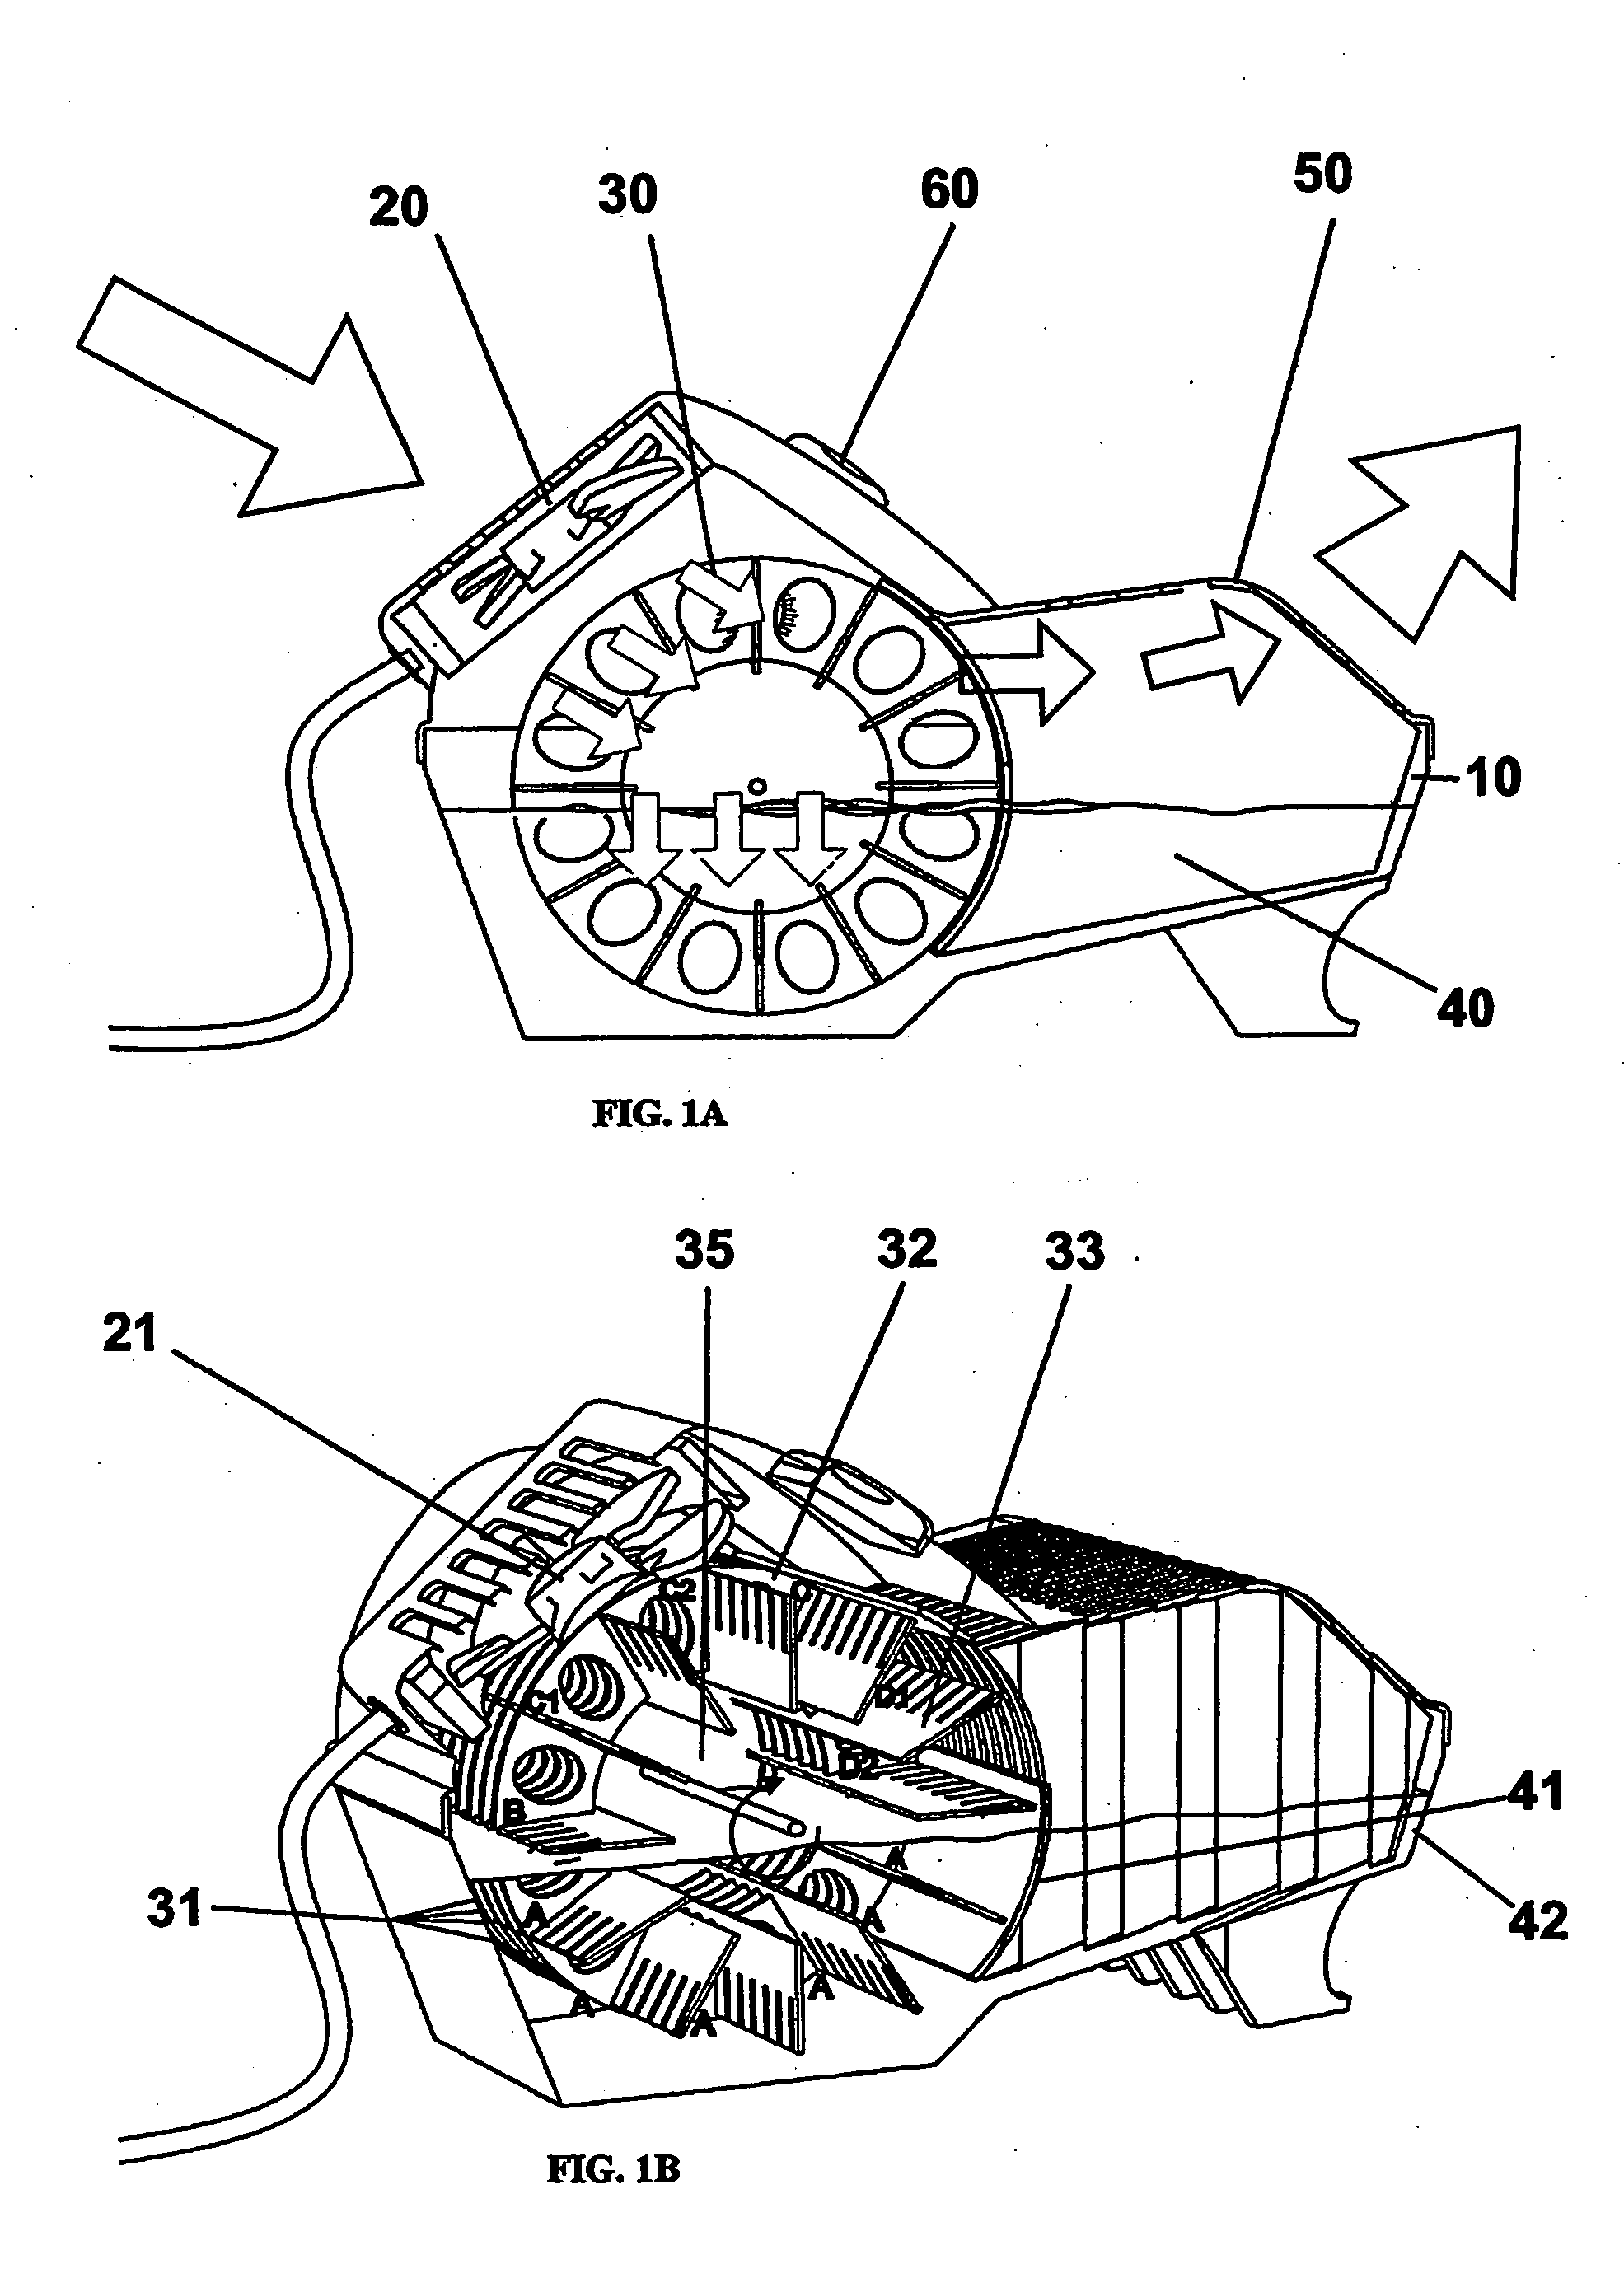 System and device for mass transfer and elimination of contaminants